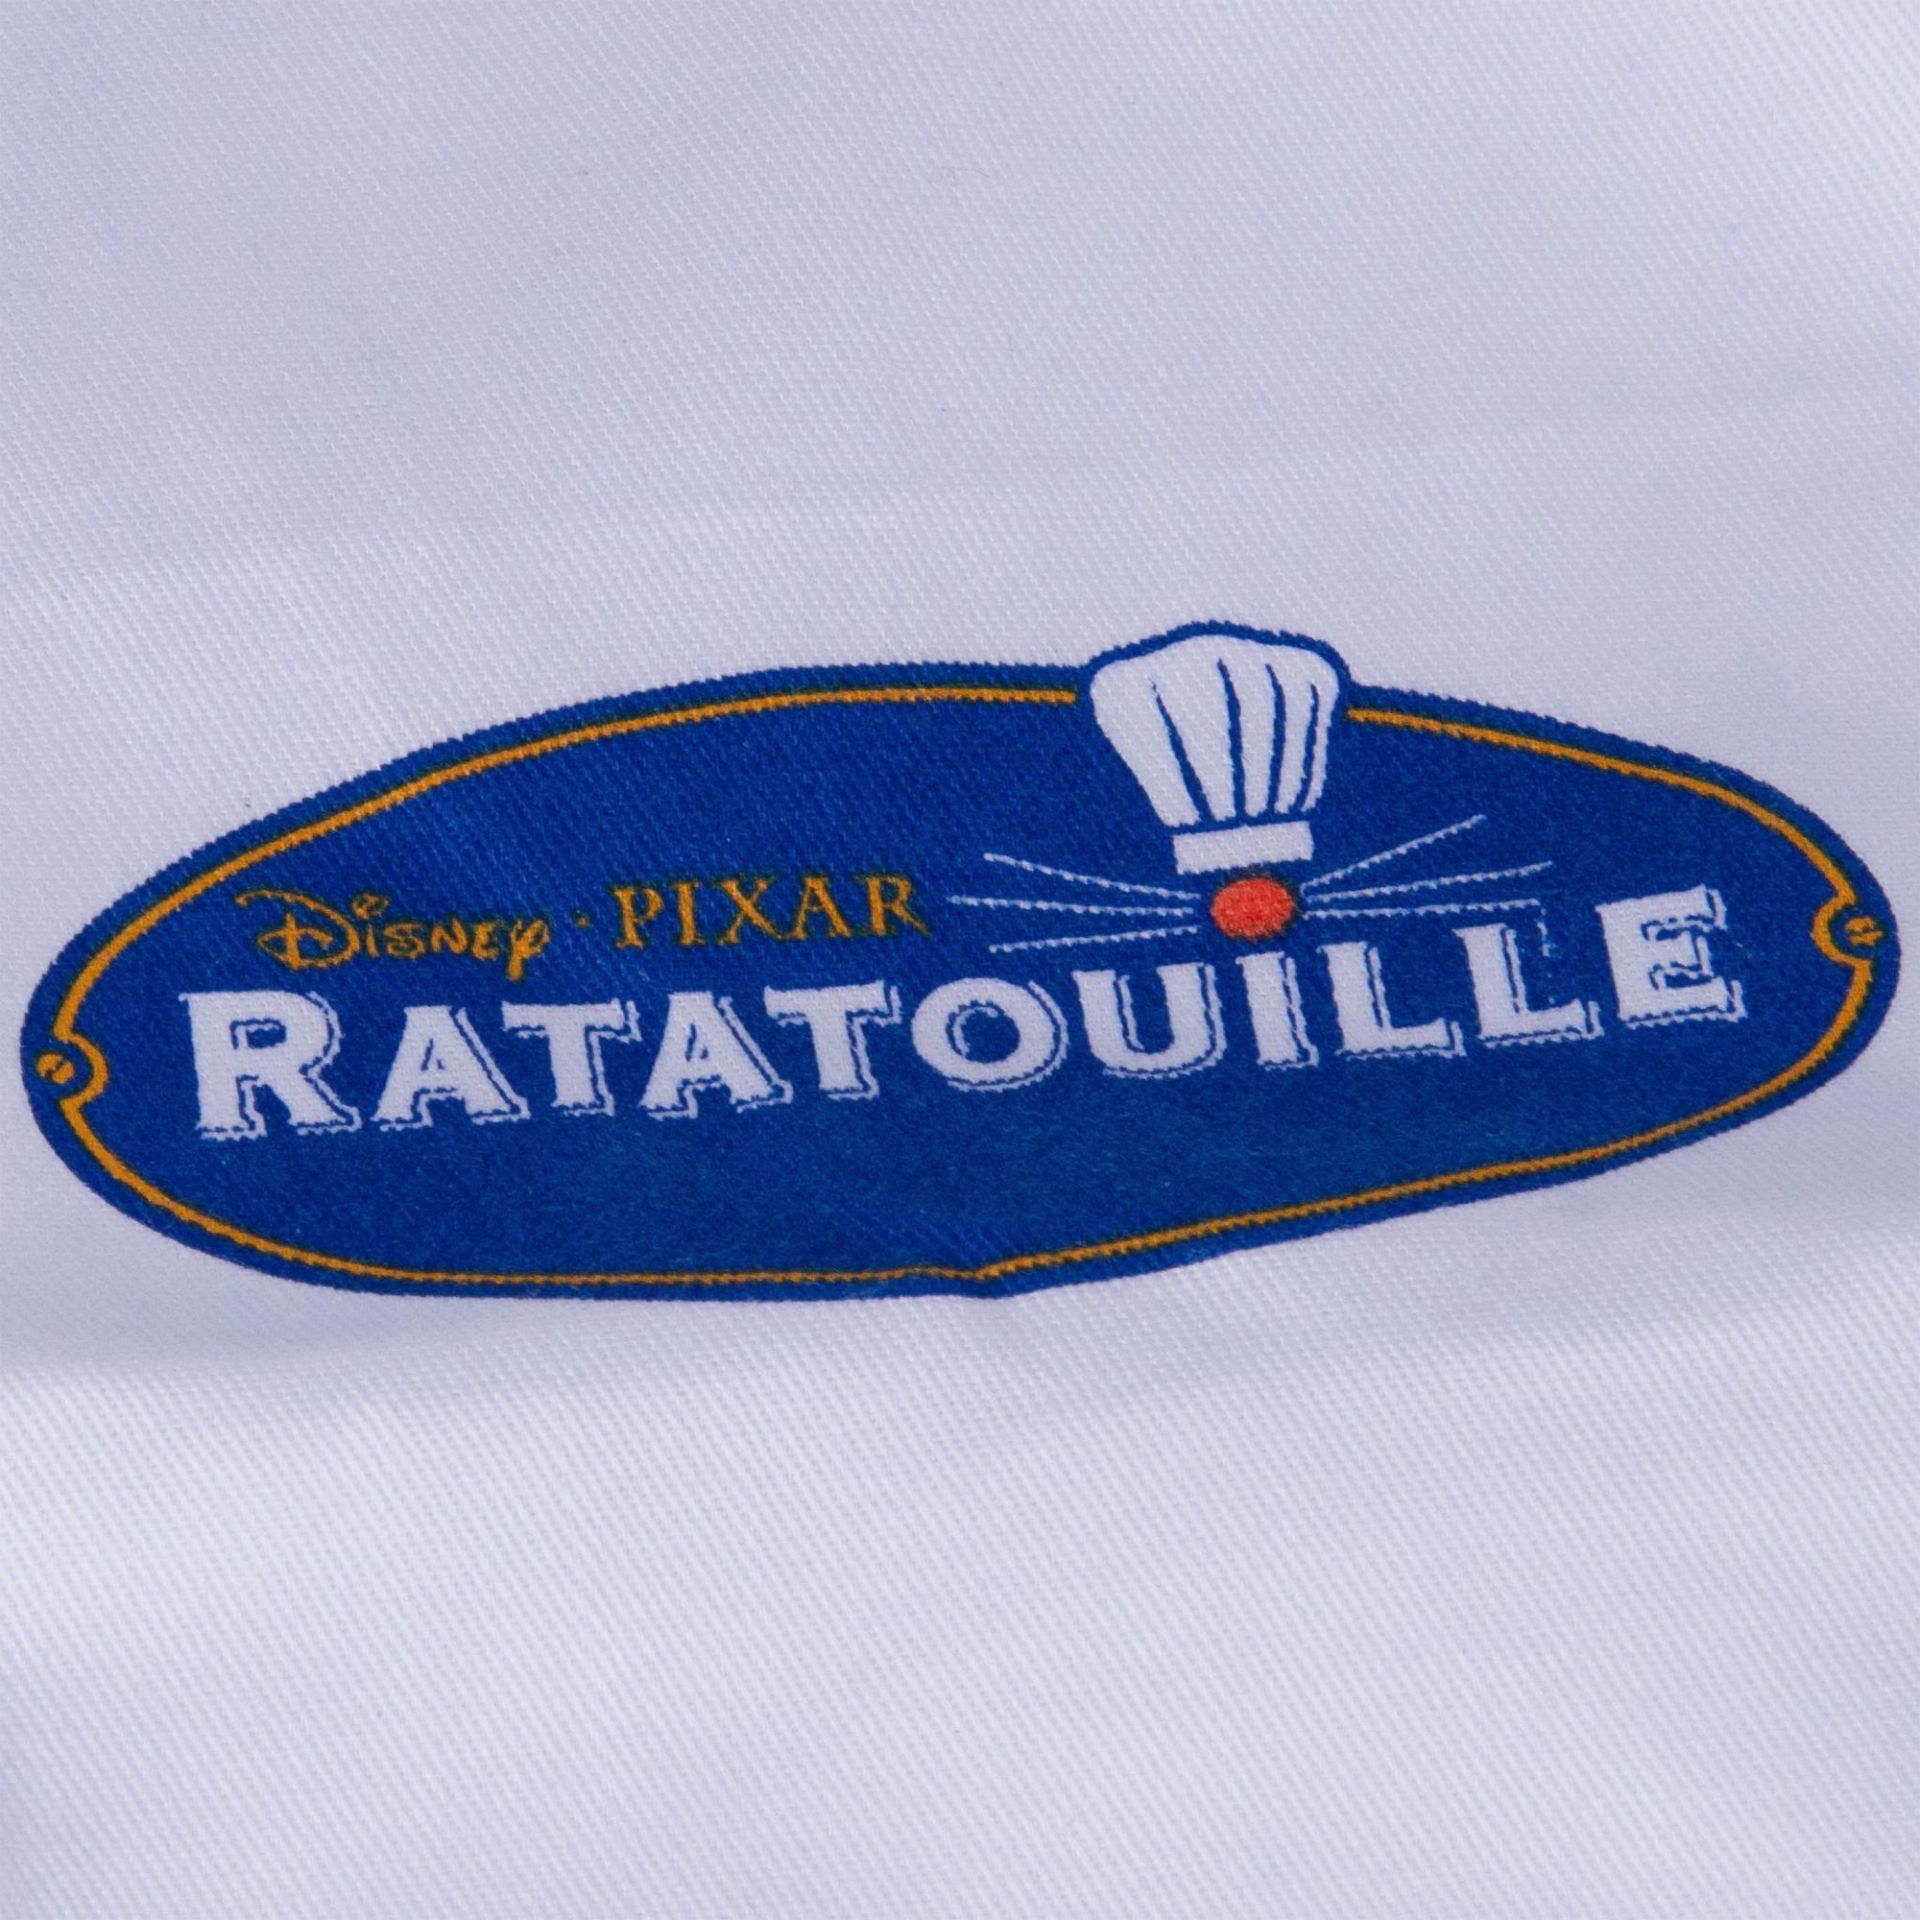 Adorable Disney Pixar Ratatouille Youth Apron and Chef's Hat - Image 2 of 7